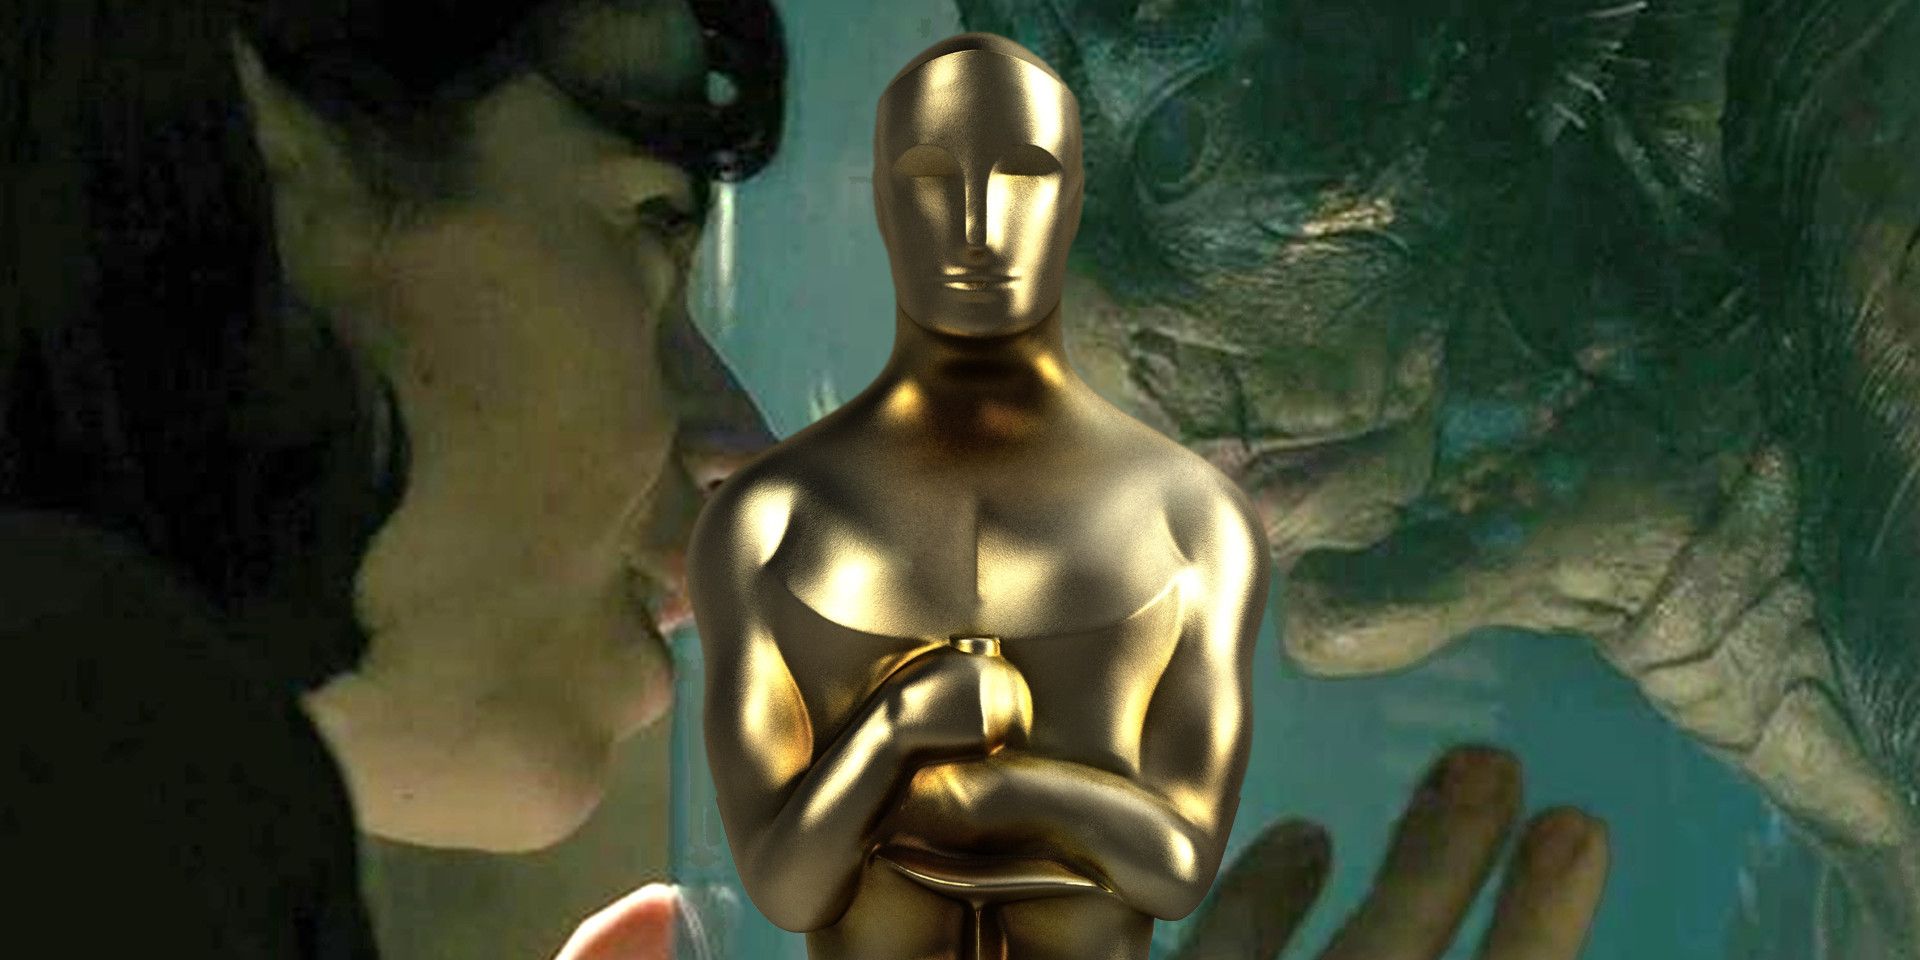 Premios que ganó the shape of water